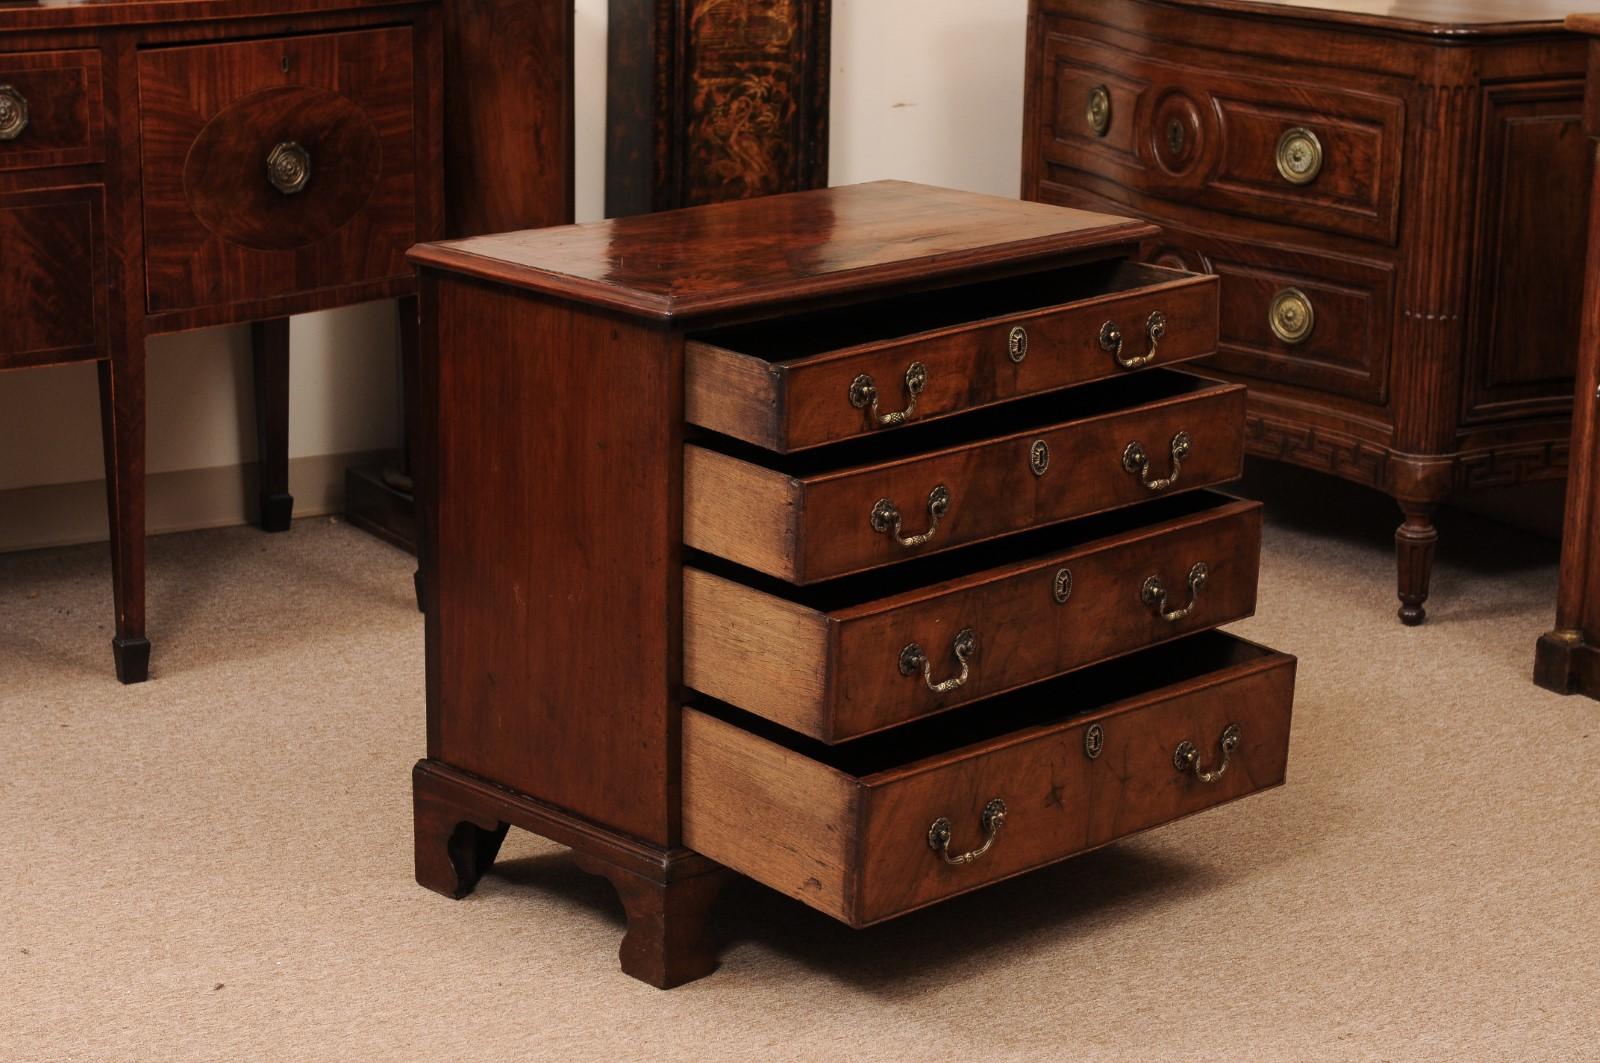 Small 18th Century English Mahogany Bachelor’s Chest with 4 Drawers and Bracket For Sale 1